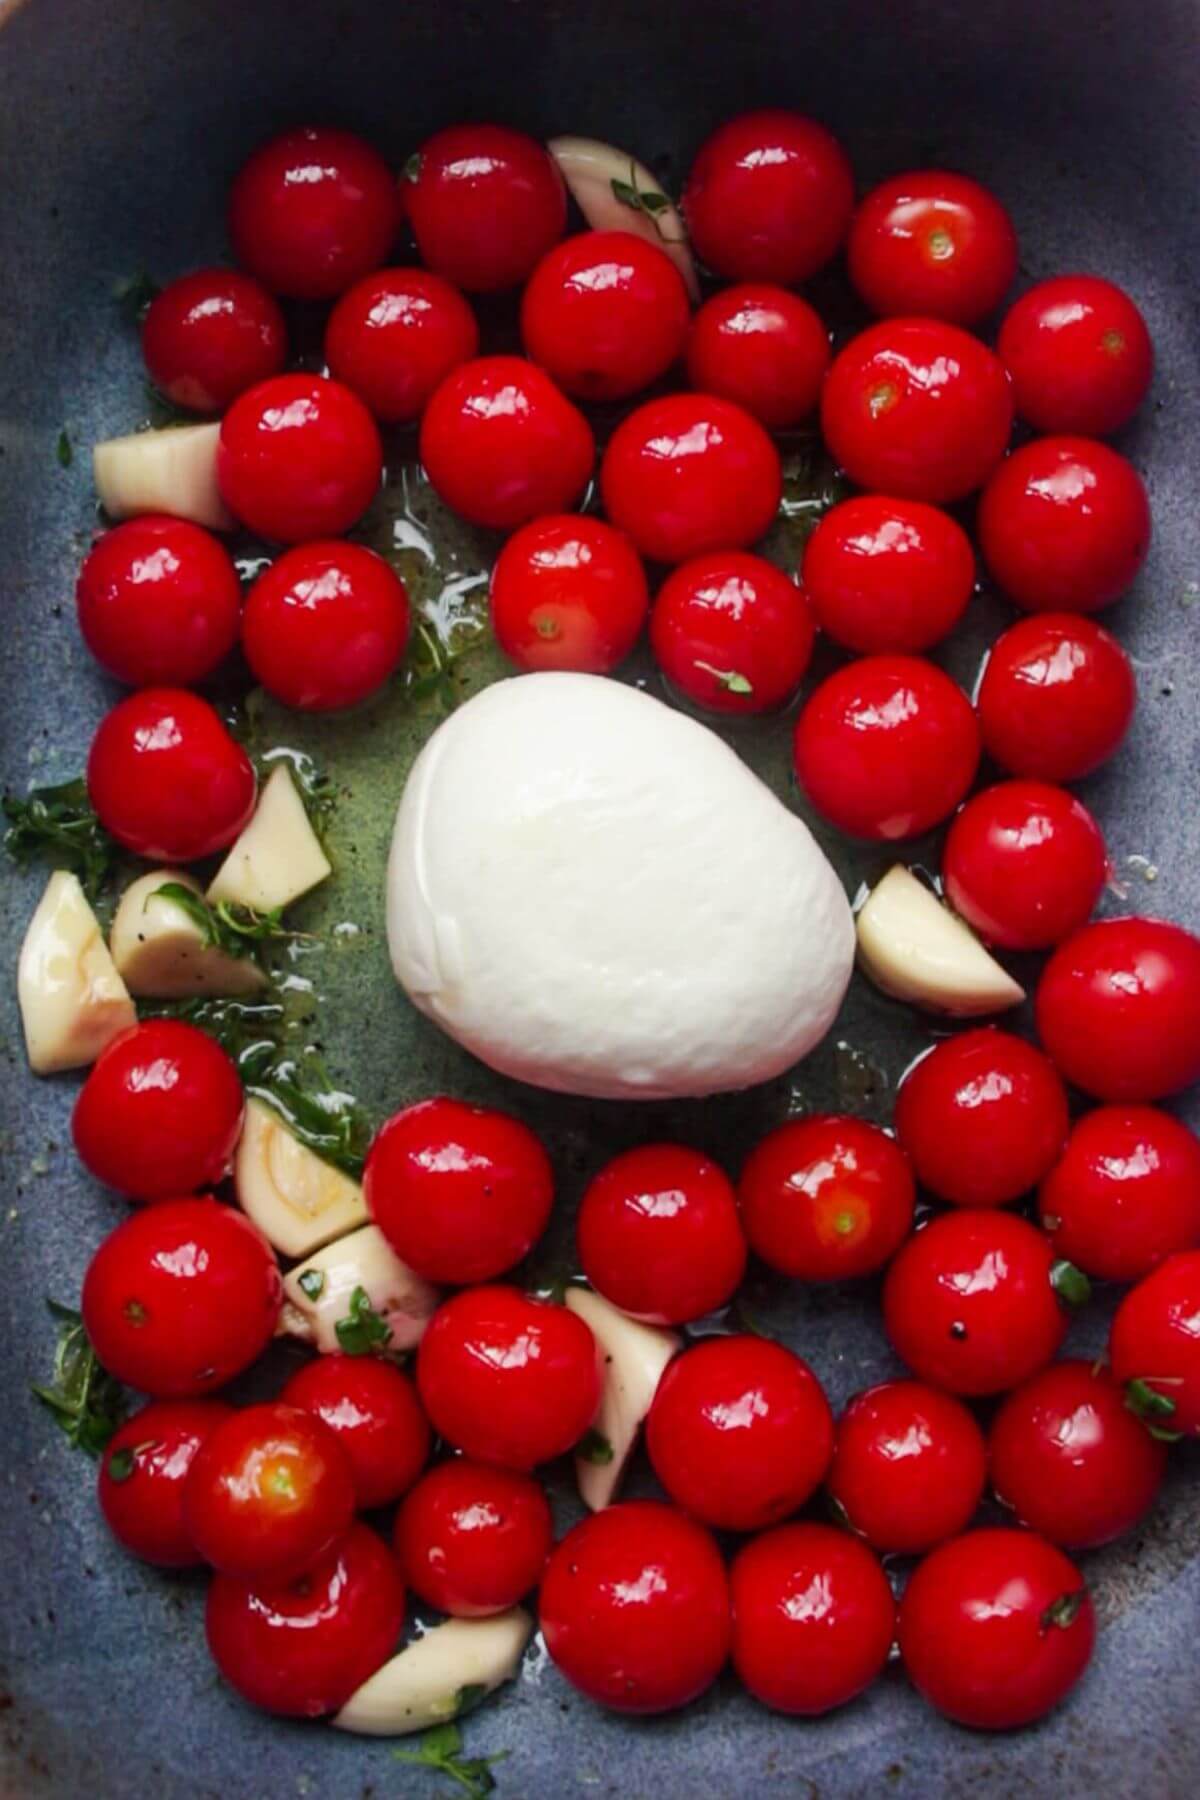 Burrata, cherry tomatoes, garlic, thyme and olive oil in a small blue oven dish.